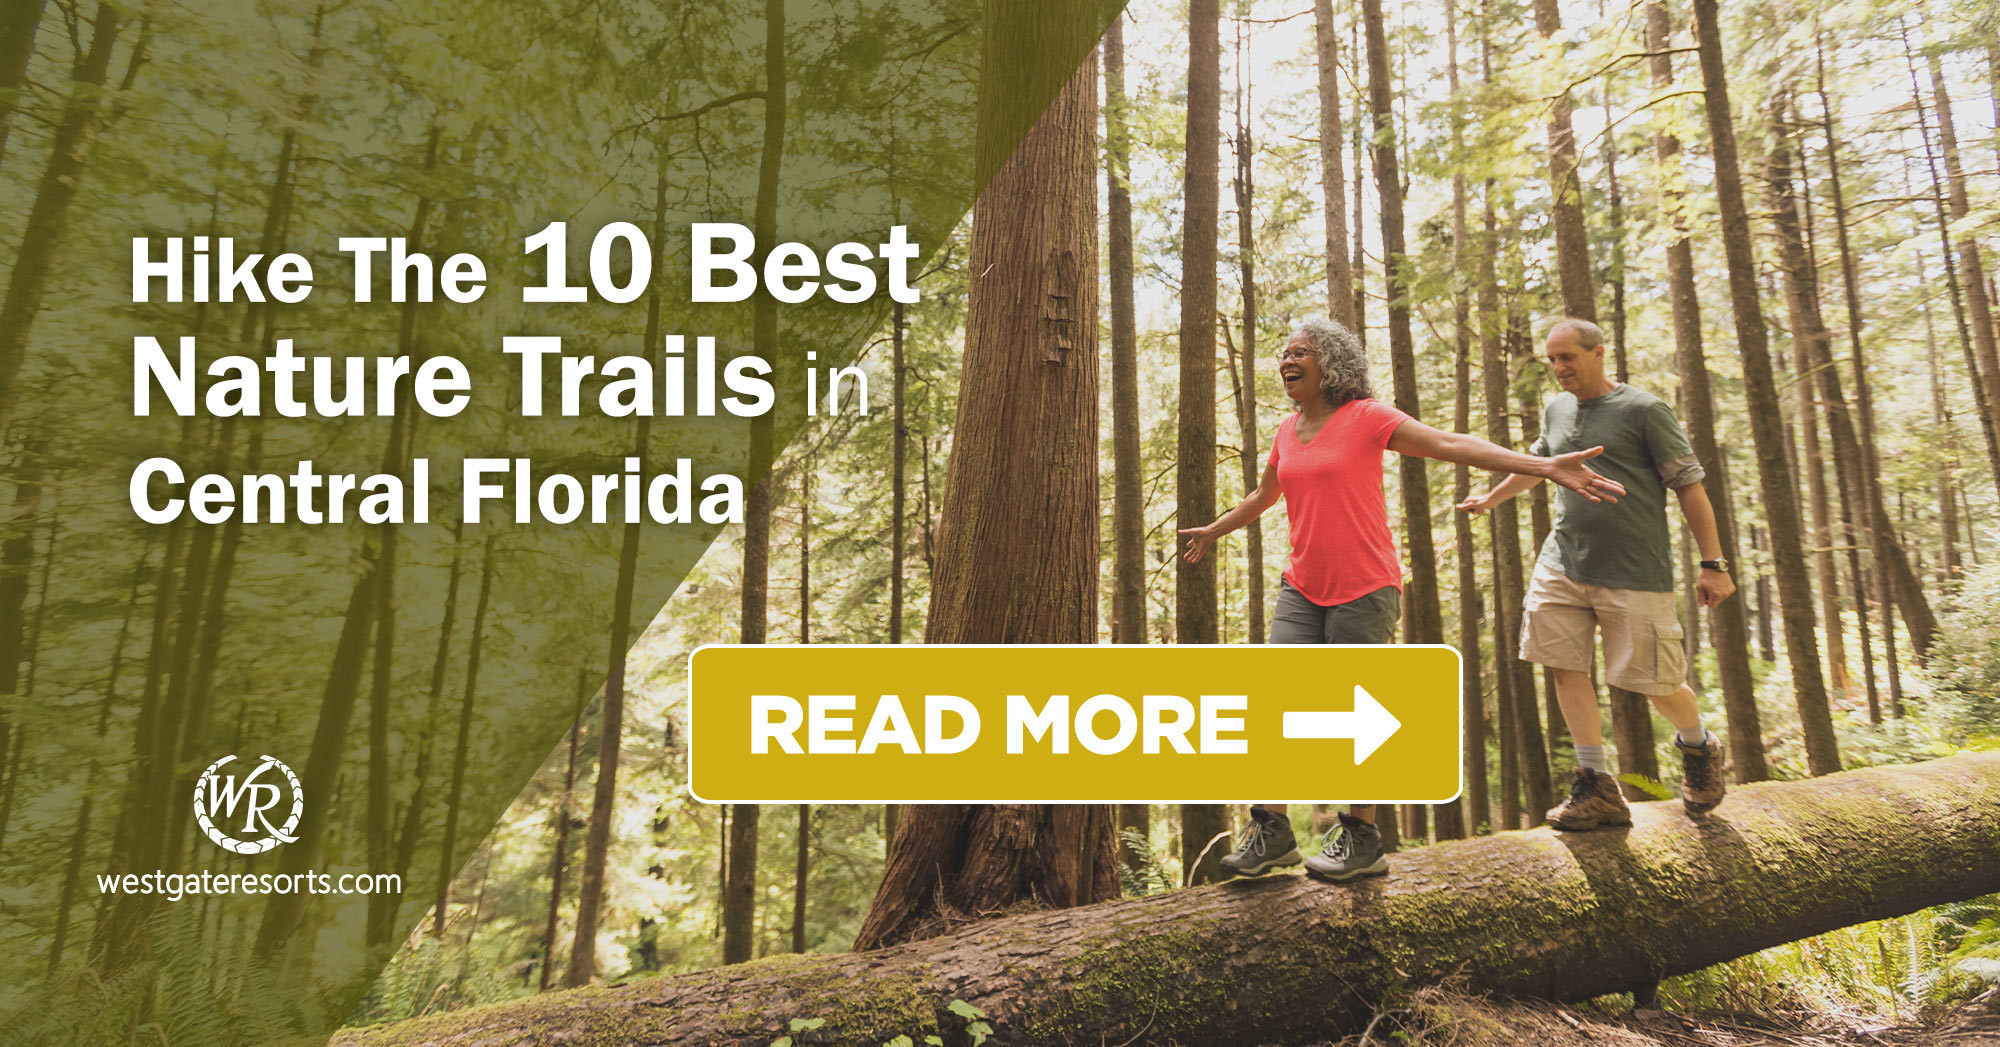 The Best Hiking Trails Near Central Florida For Scenic Hiking, Day Hiking, or Longer Hikes | Best Places in Florida For Hiking